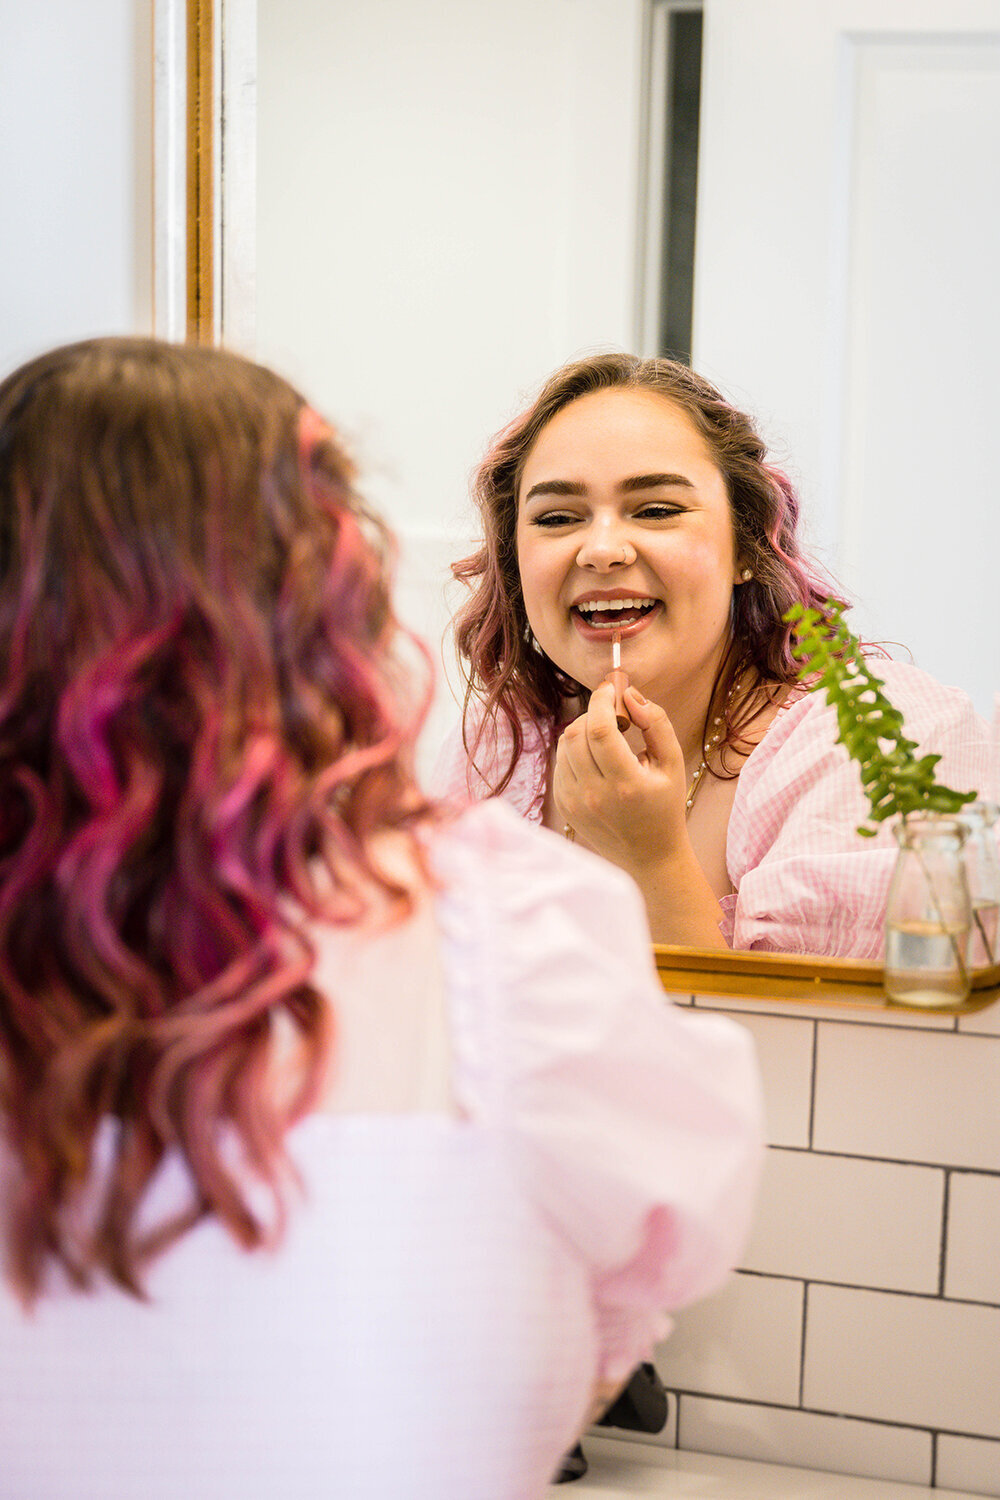 A marrier on her elopement day gets up and close in the mirror as she gets ready. She is smiling as she applies lip gloss in a clean and modern hotel bathroom.